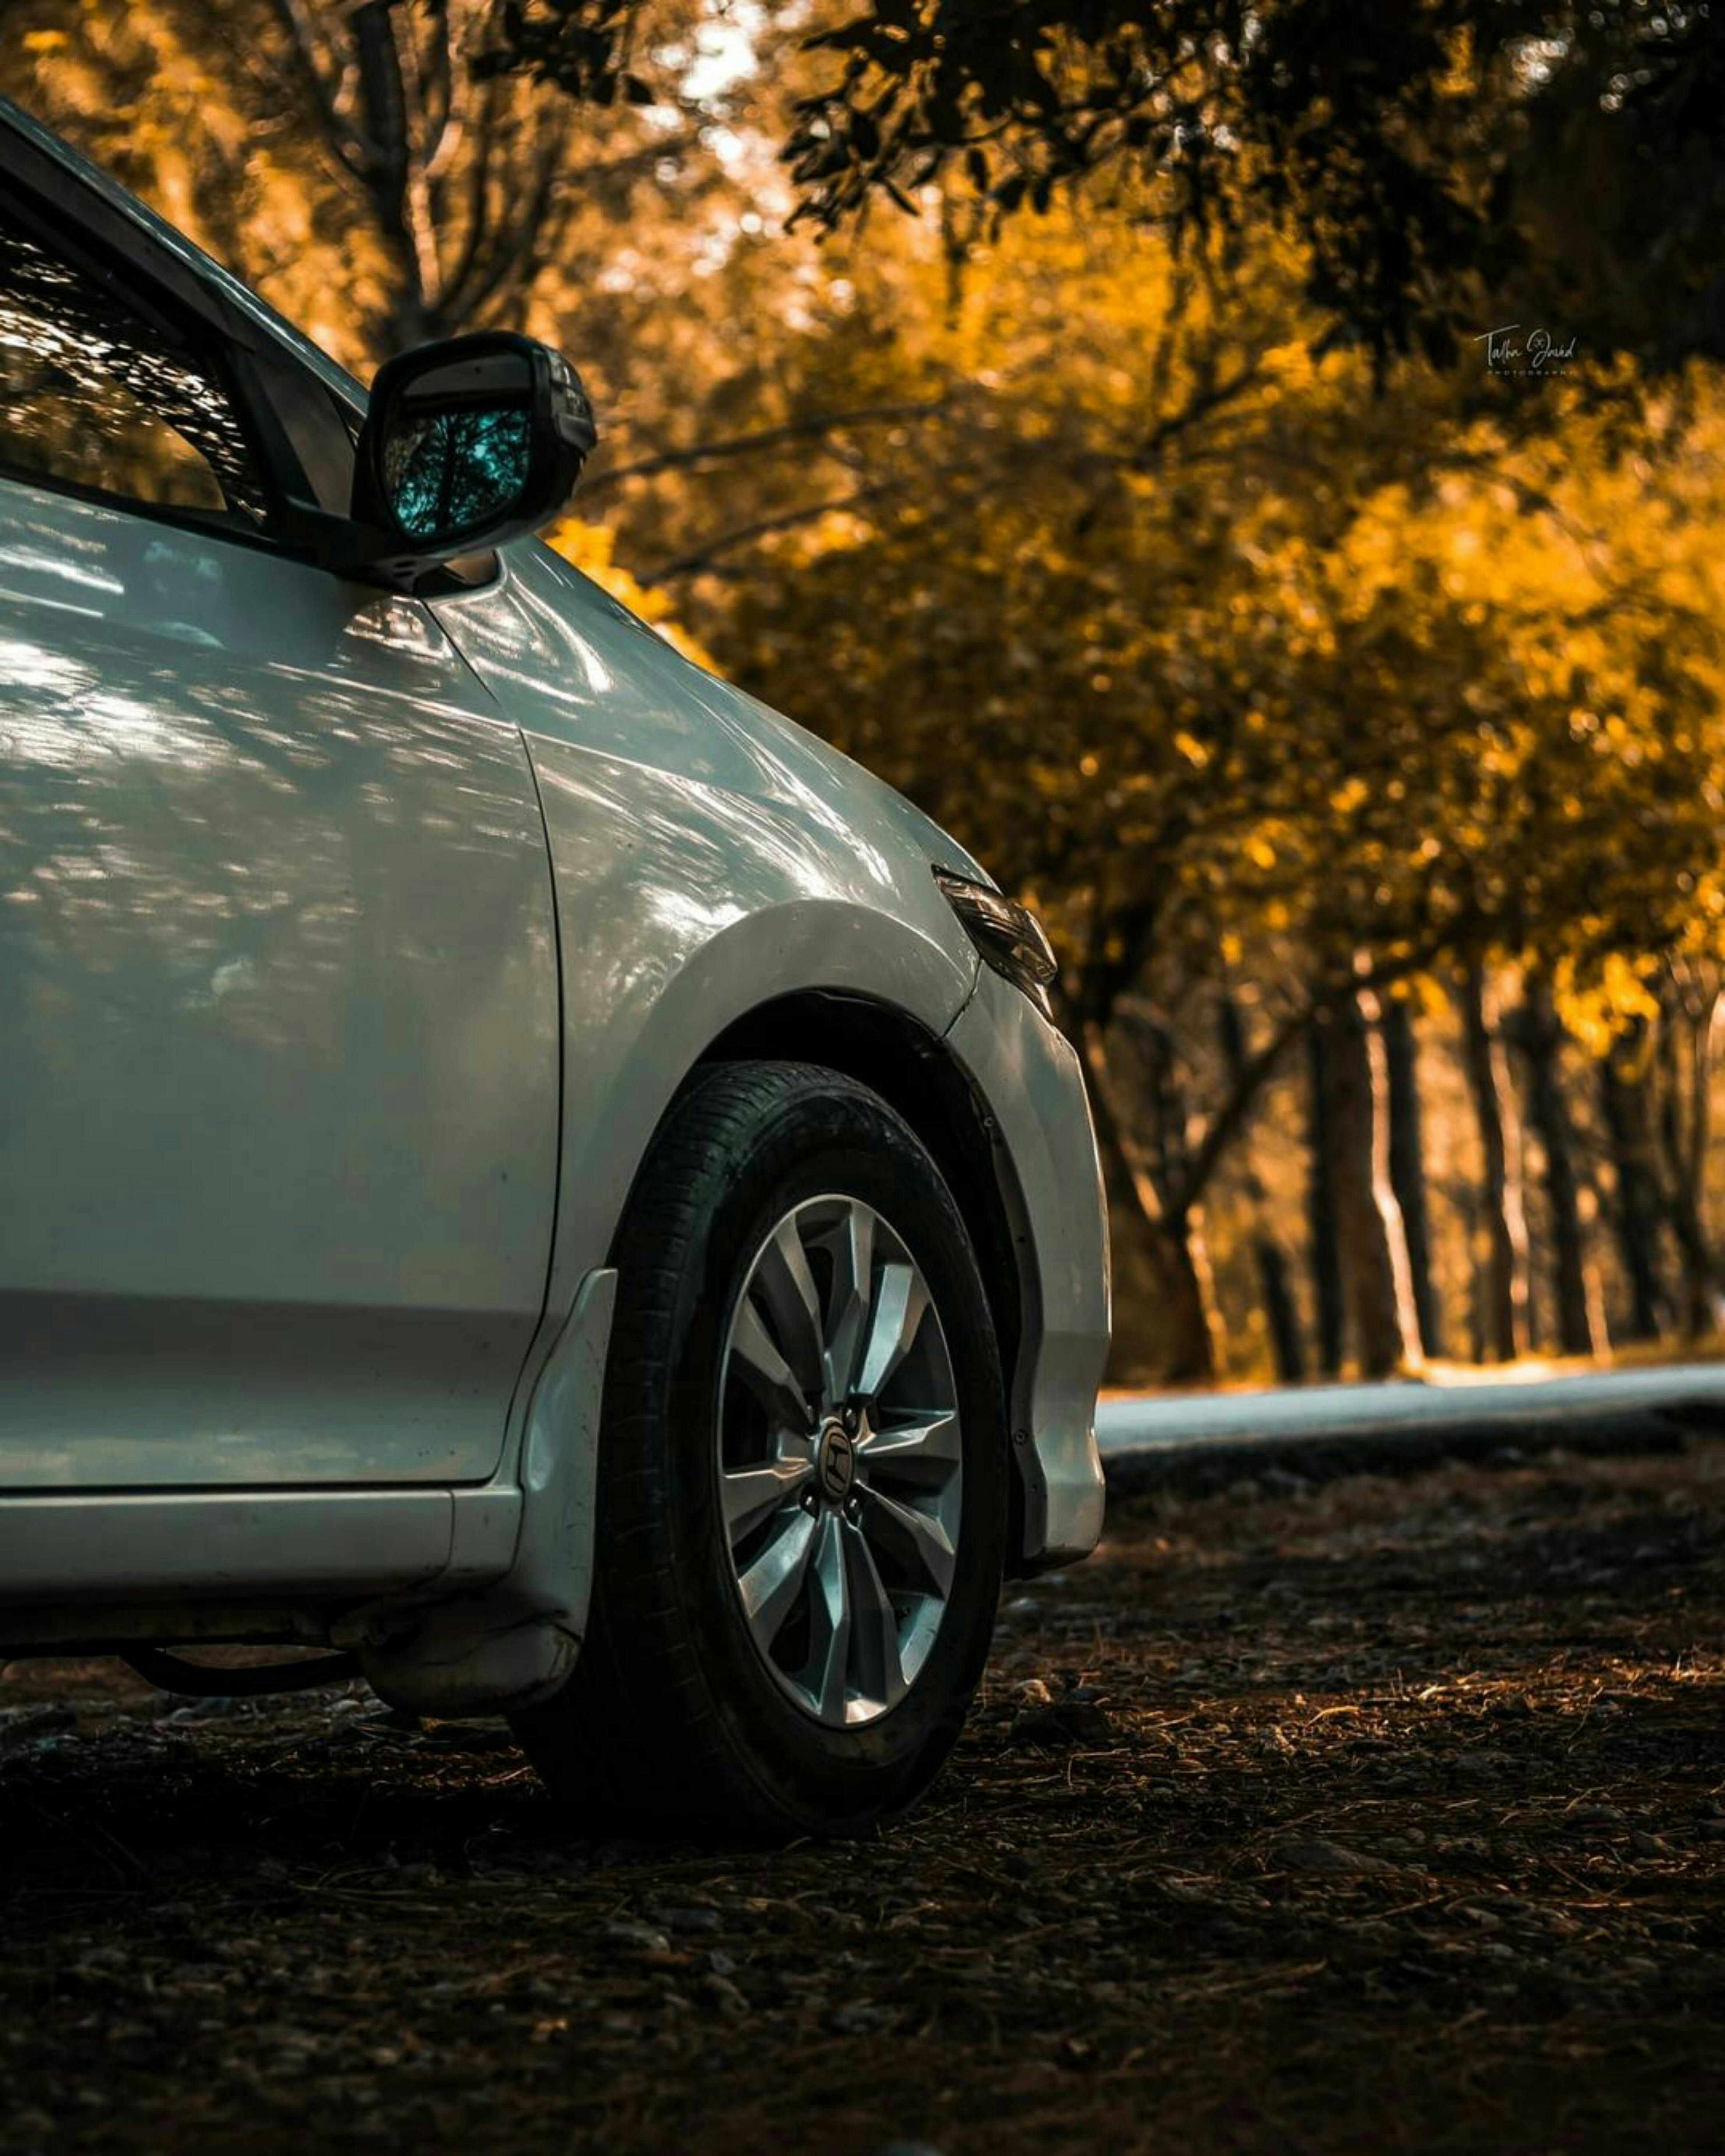 The sideview of a car | Source: Pexels